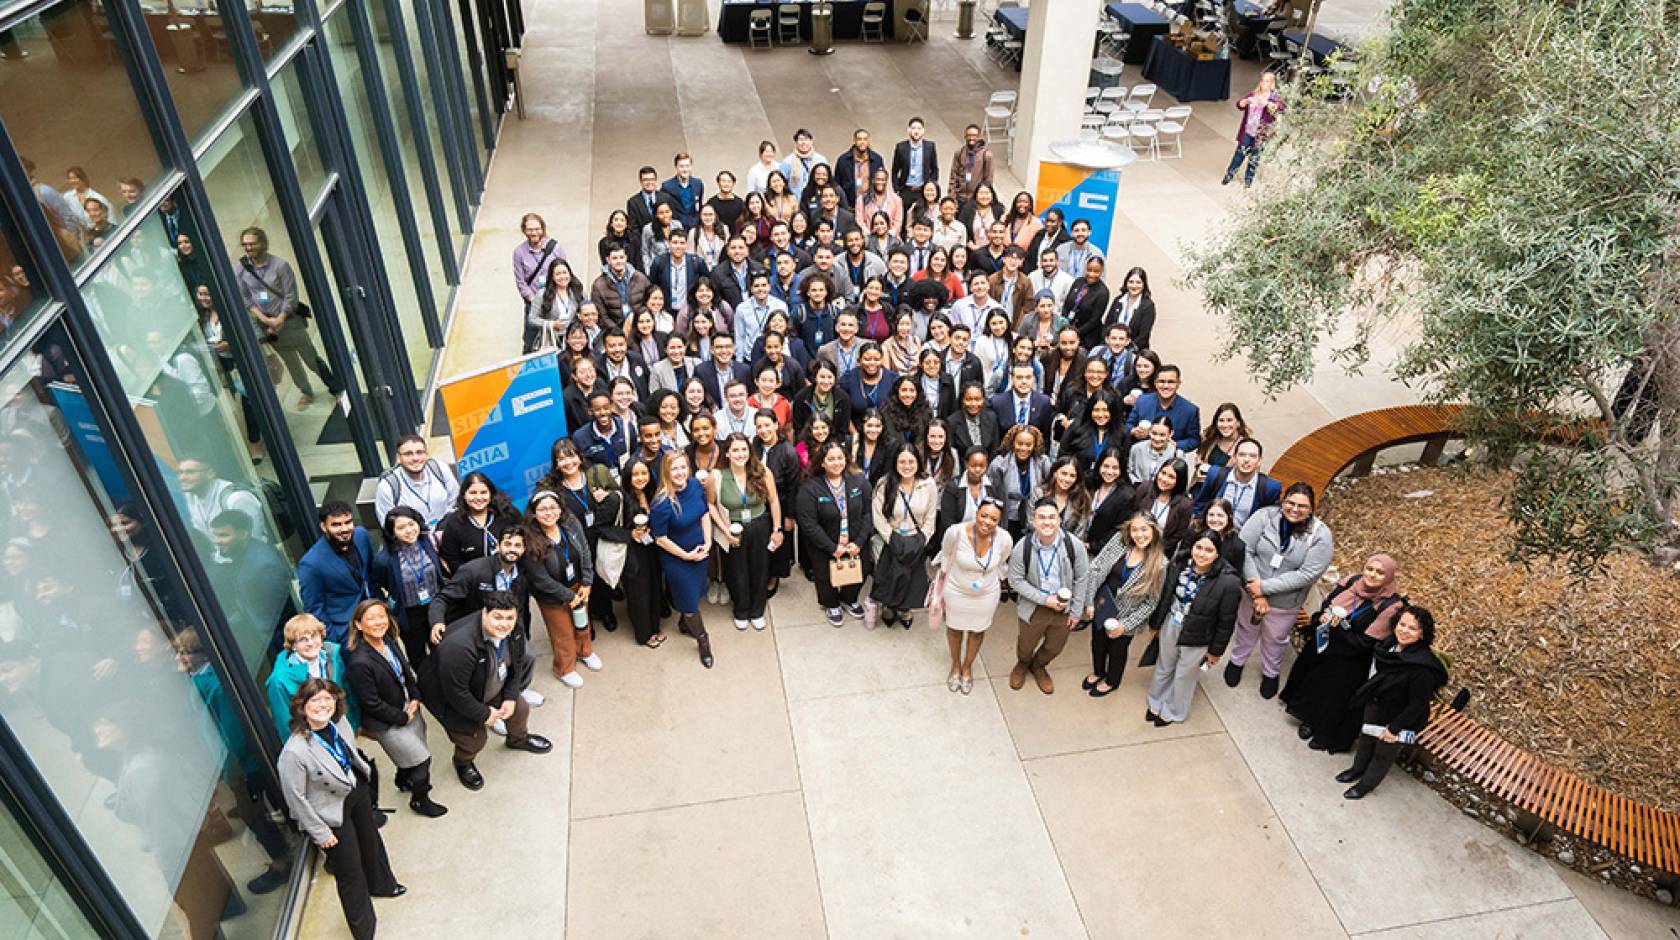 A group photo taken from above of ~200 young medical students in business attire, gathered in a courtyard.